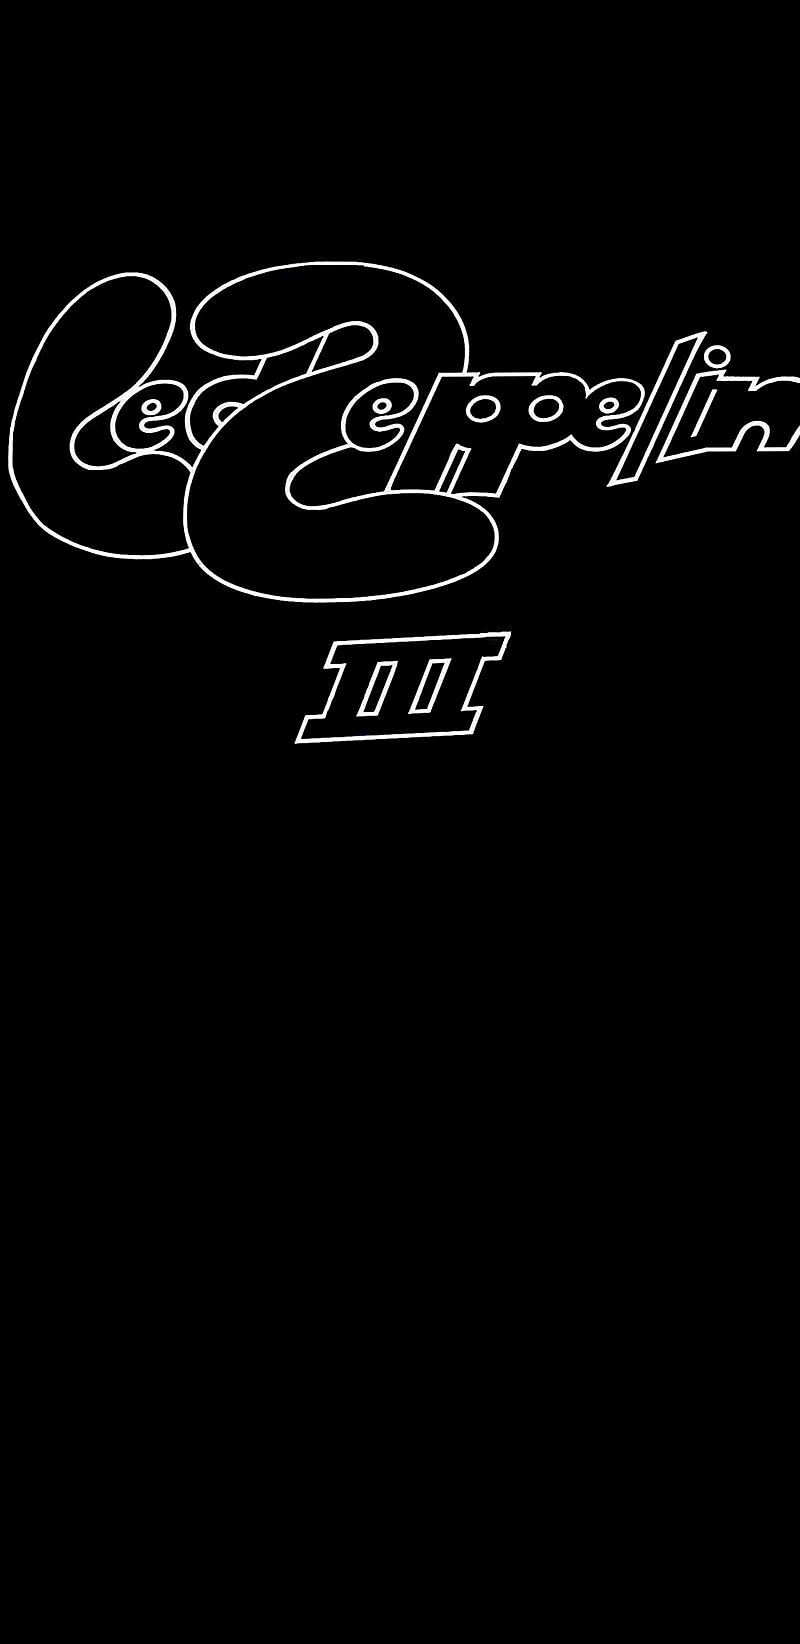 Led Zeppelin iPhone Wallpaper For iPhone